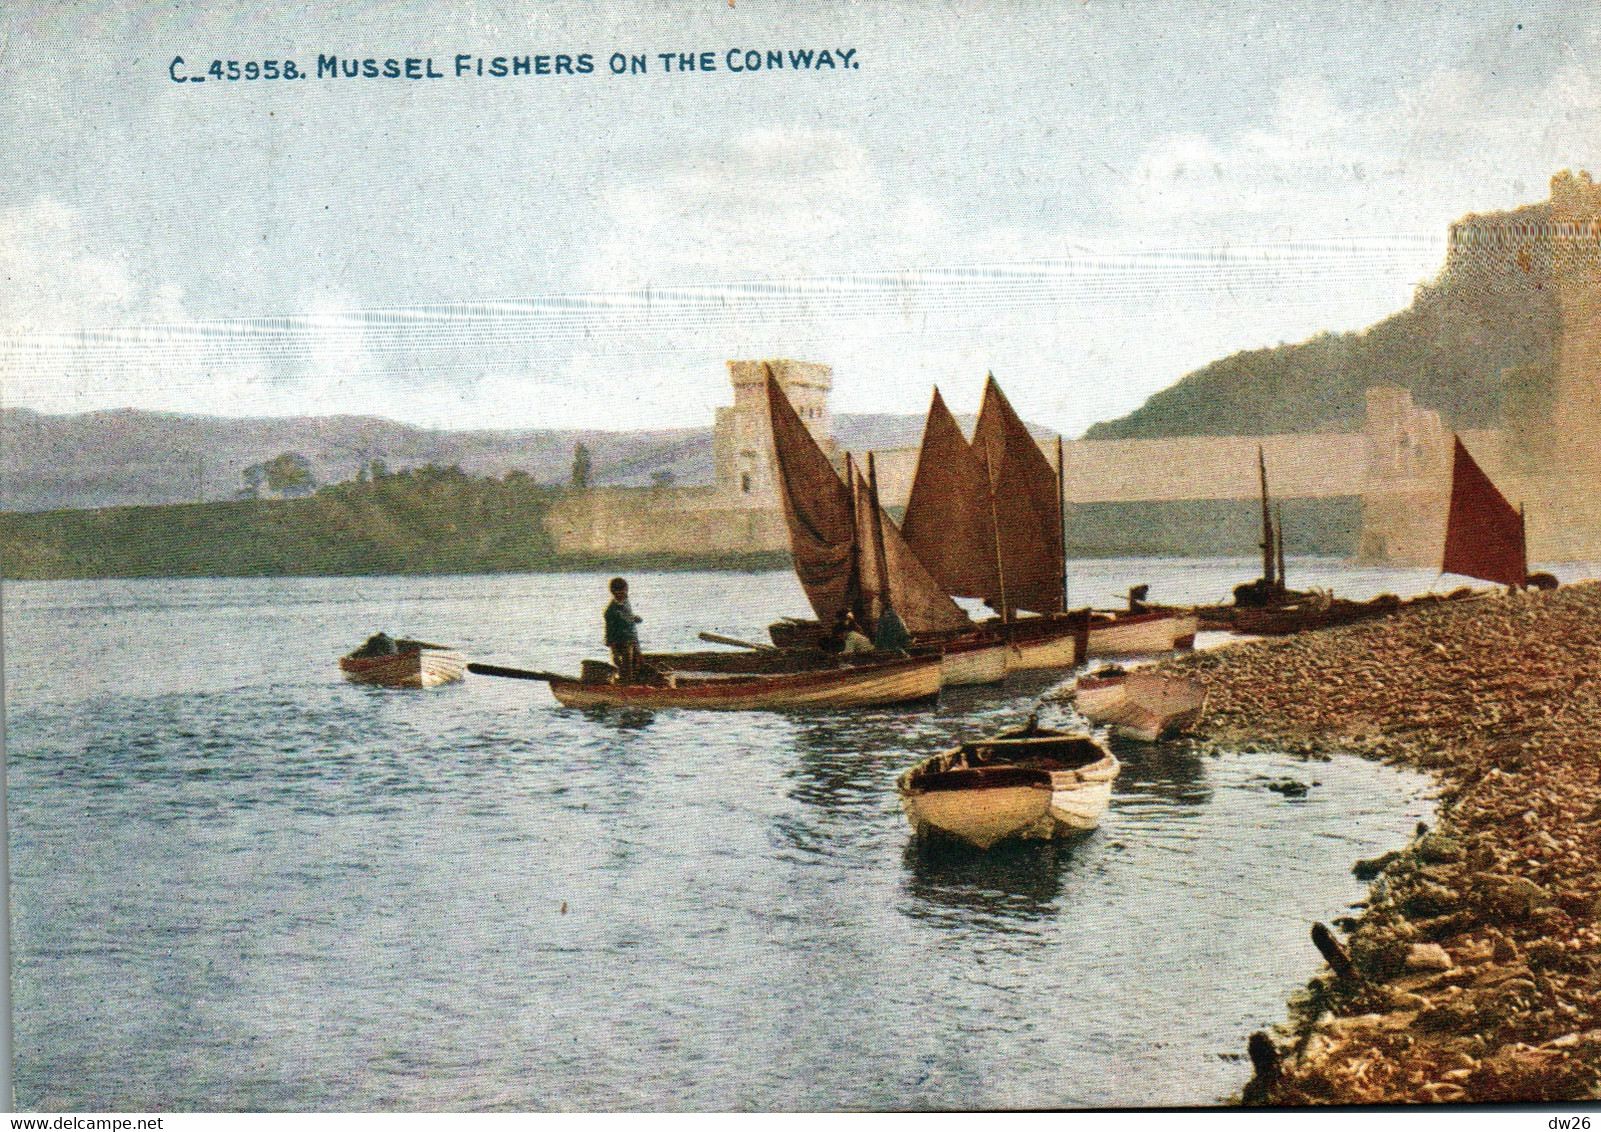 Conwy - Mussel Fishers On The Conway - Celesque Series N° C. 45958 - Caernarvonshire